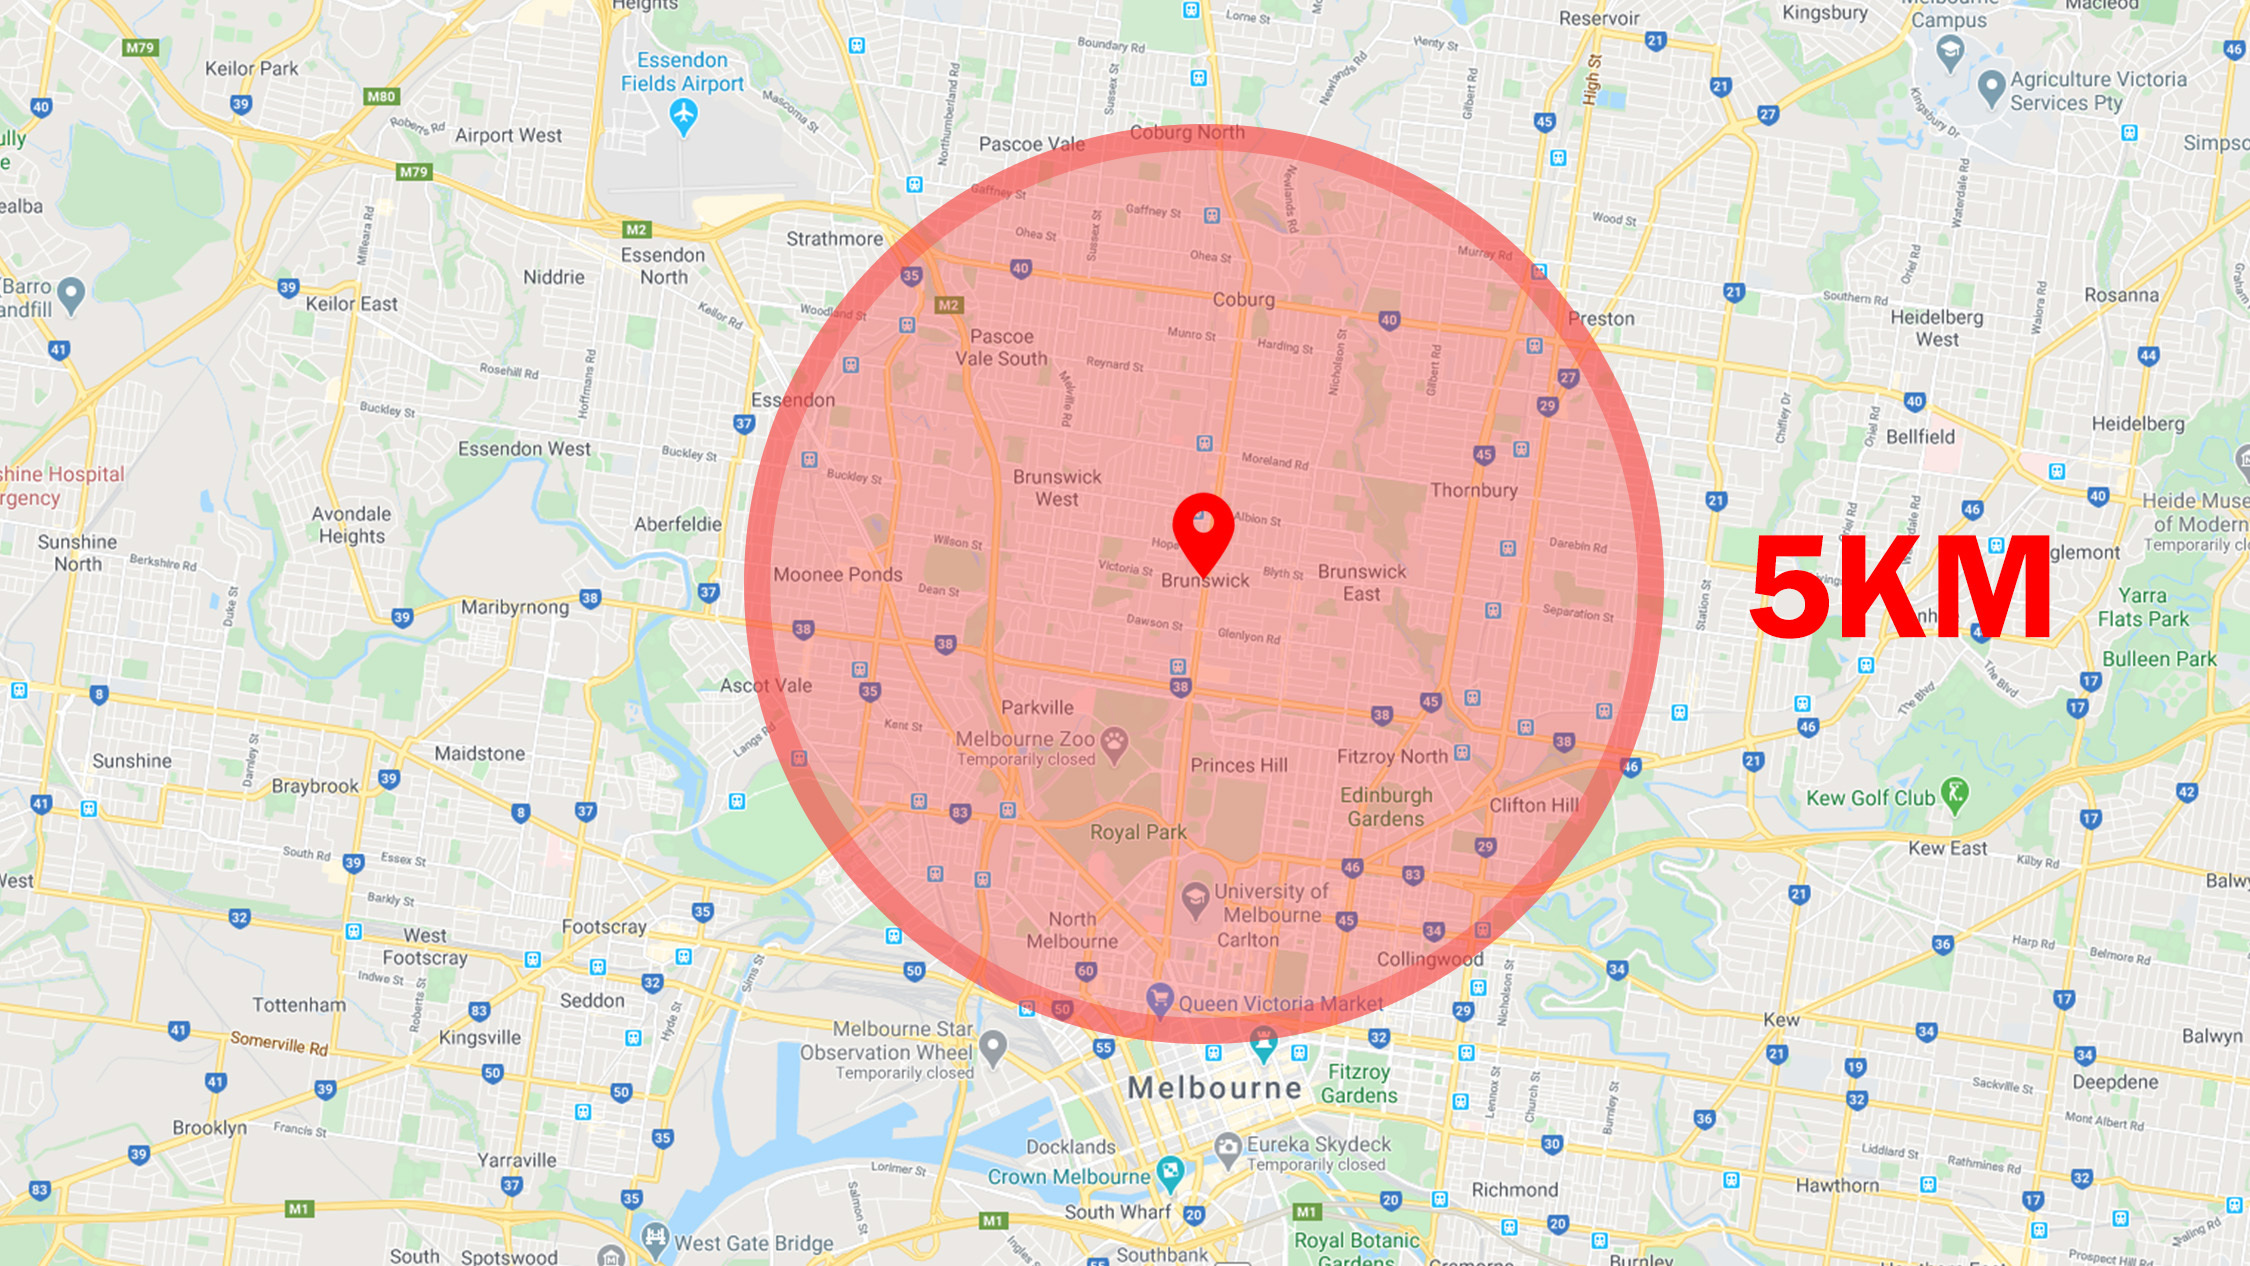 Coronavirus Victoria: Find the 5km radius from home with this map